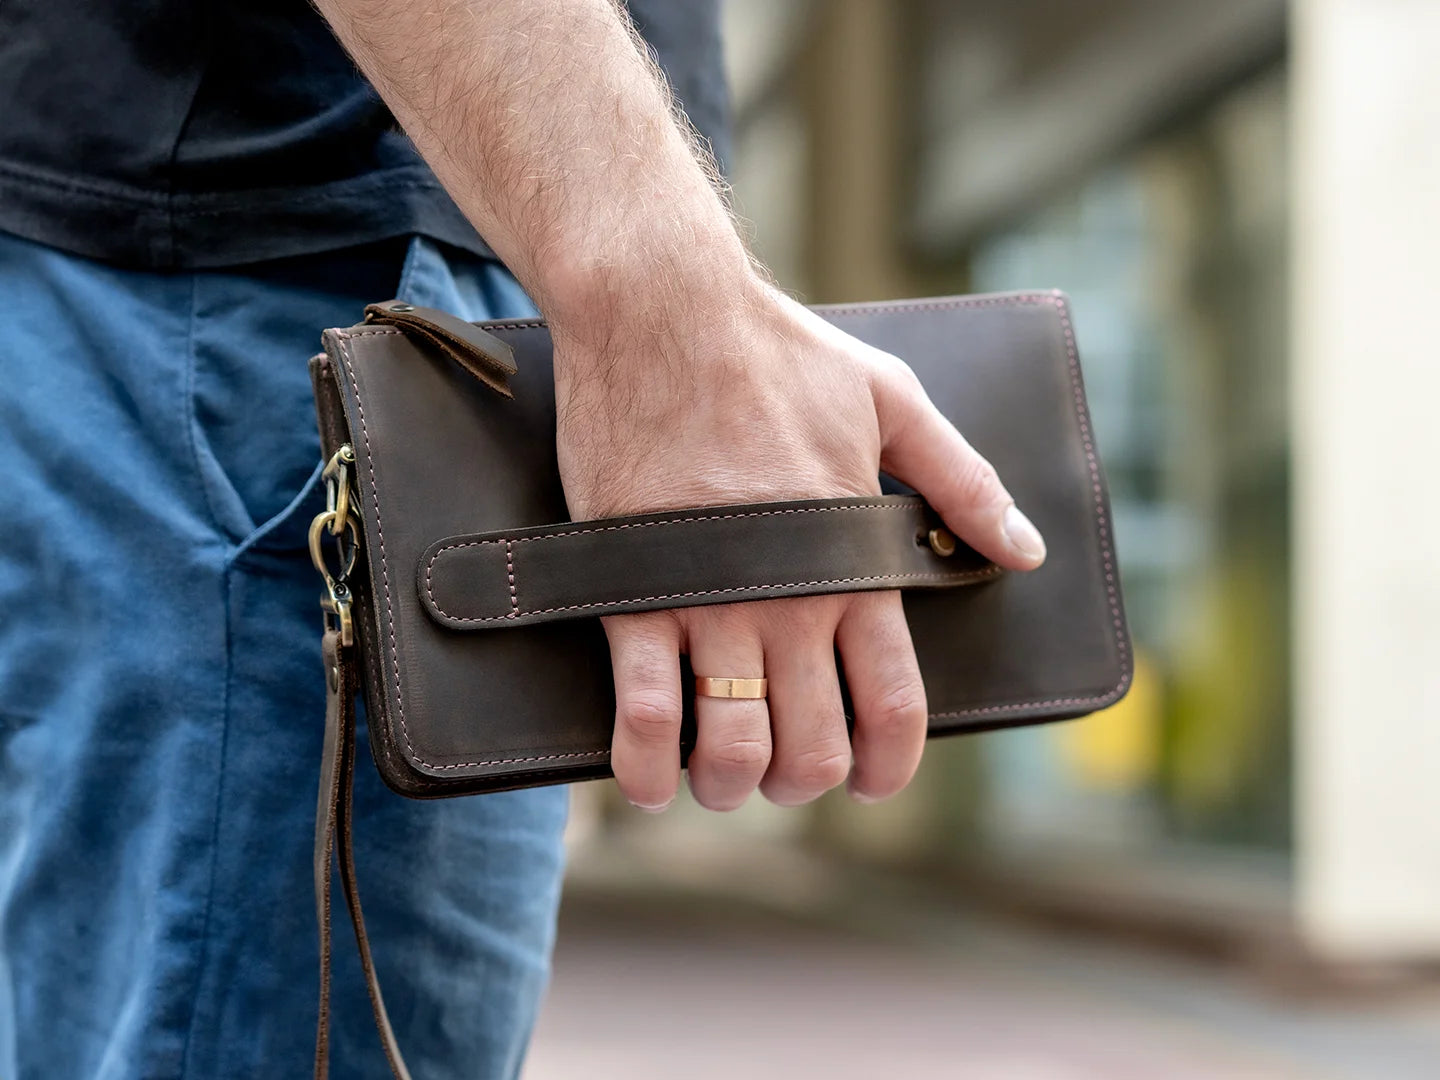 Men's Leather Clutch Bag with Wrist Strap